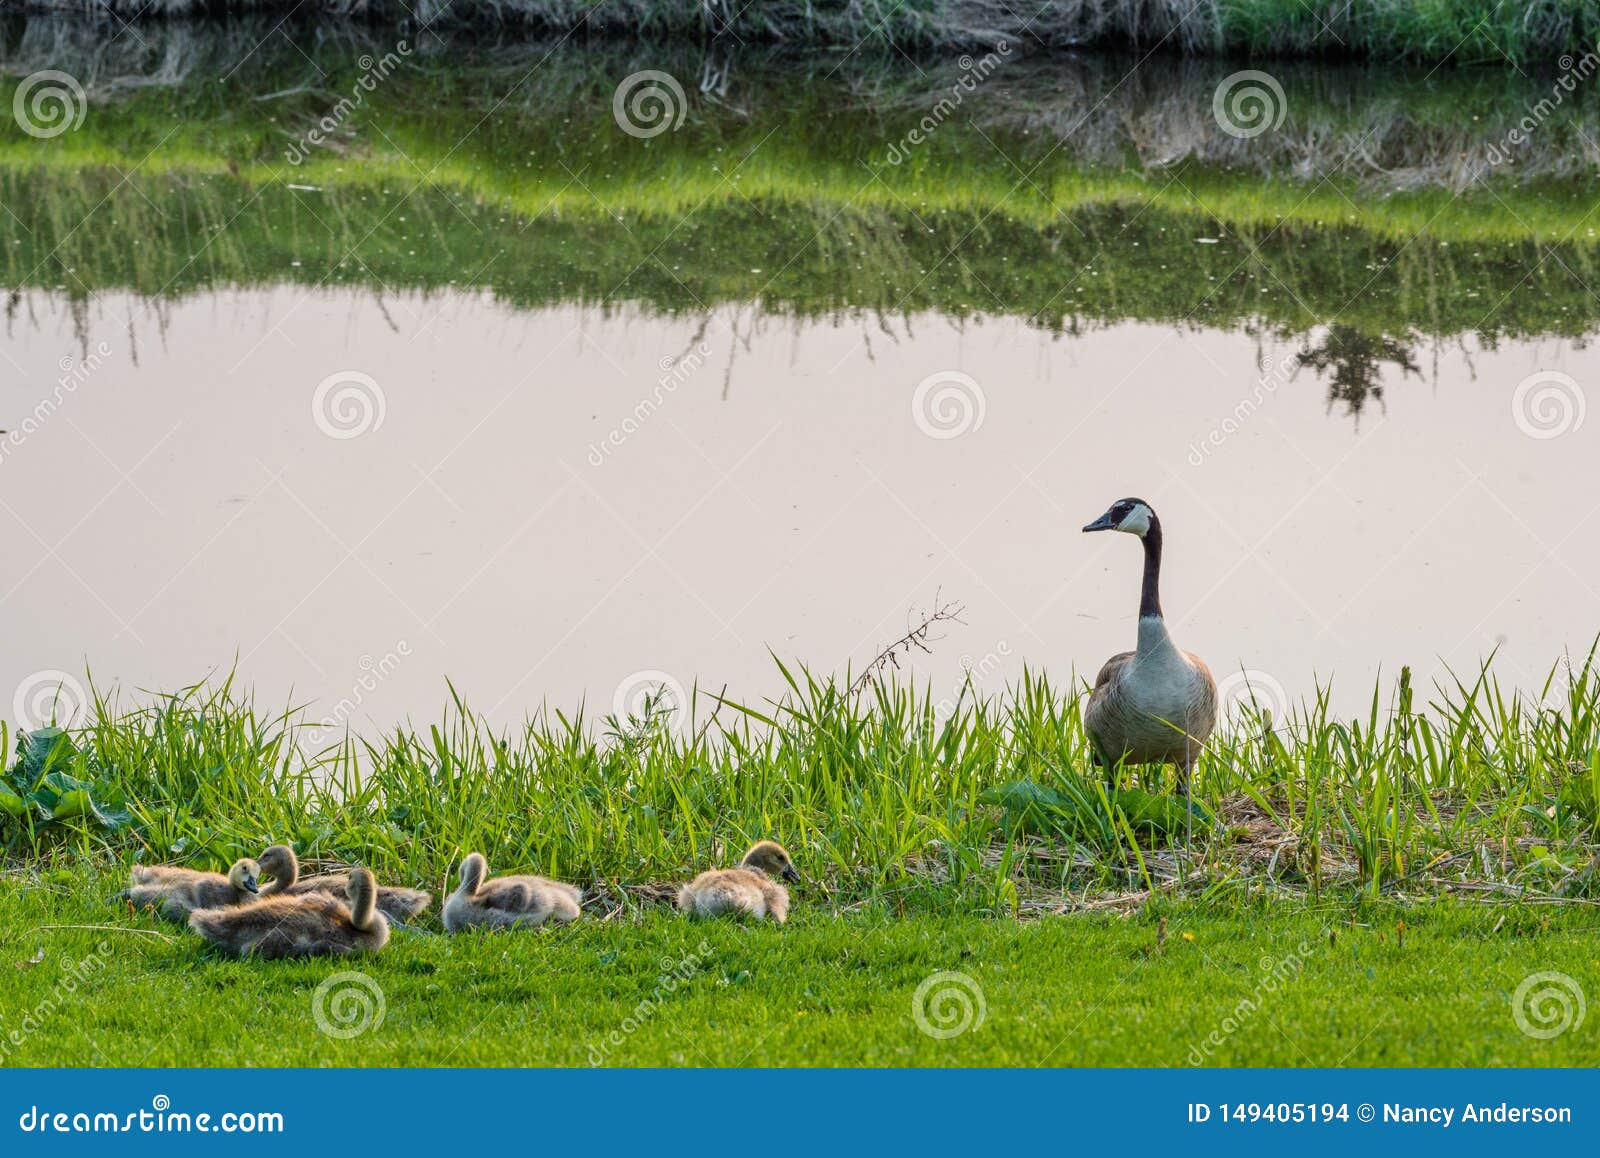 canada goose with clutch of goslings beside a creek on the elmwood golf course in swift current, sk